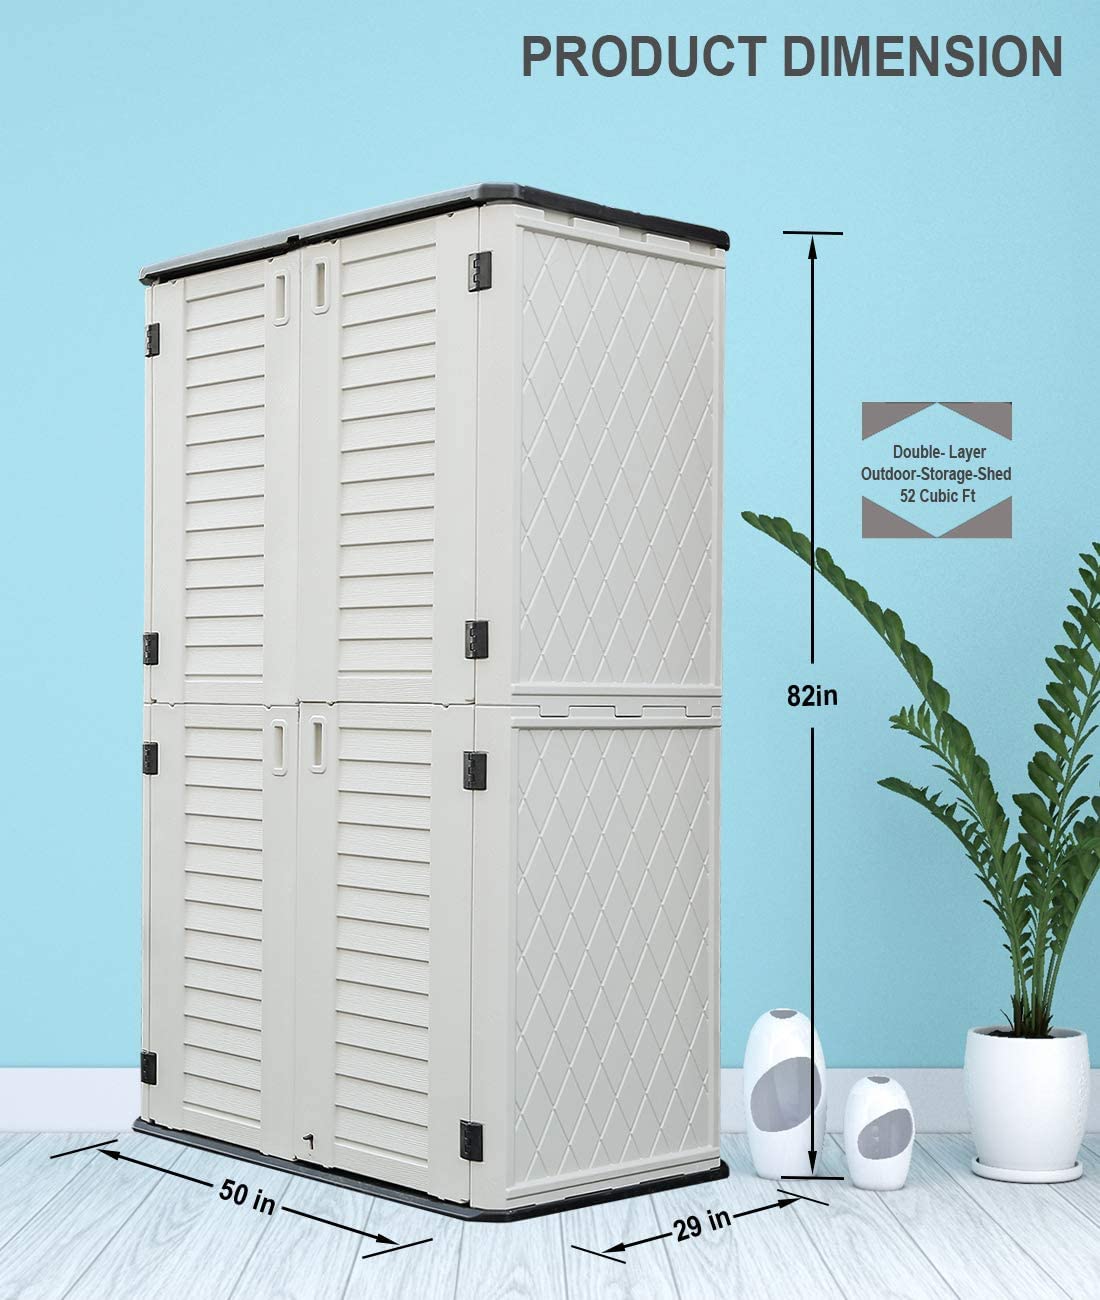 HOMSPARK Vertical Storage Shed Weather Resistance, Double-Layer Outdoor Storage Cabinet Multi-Purpose for Backyards and Patios Accessories, (50 in. L x 29 in. W x 82 in. H, 52 Cubic Feet) Grey roof,Cream white wall,Black floor